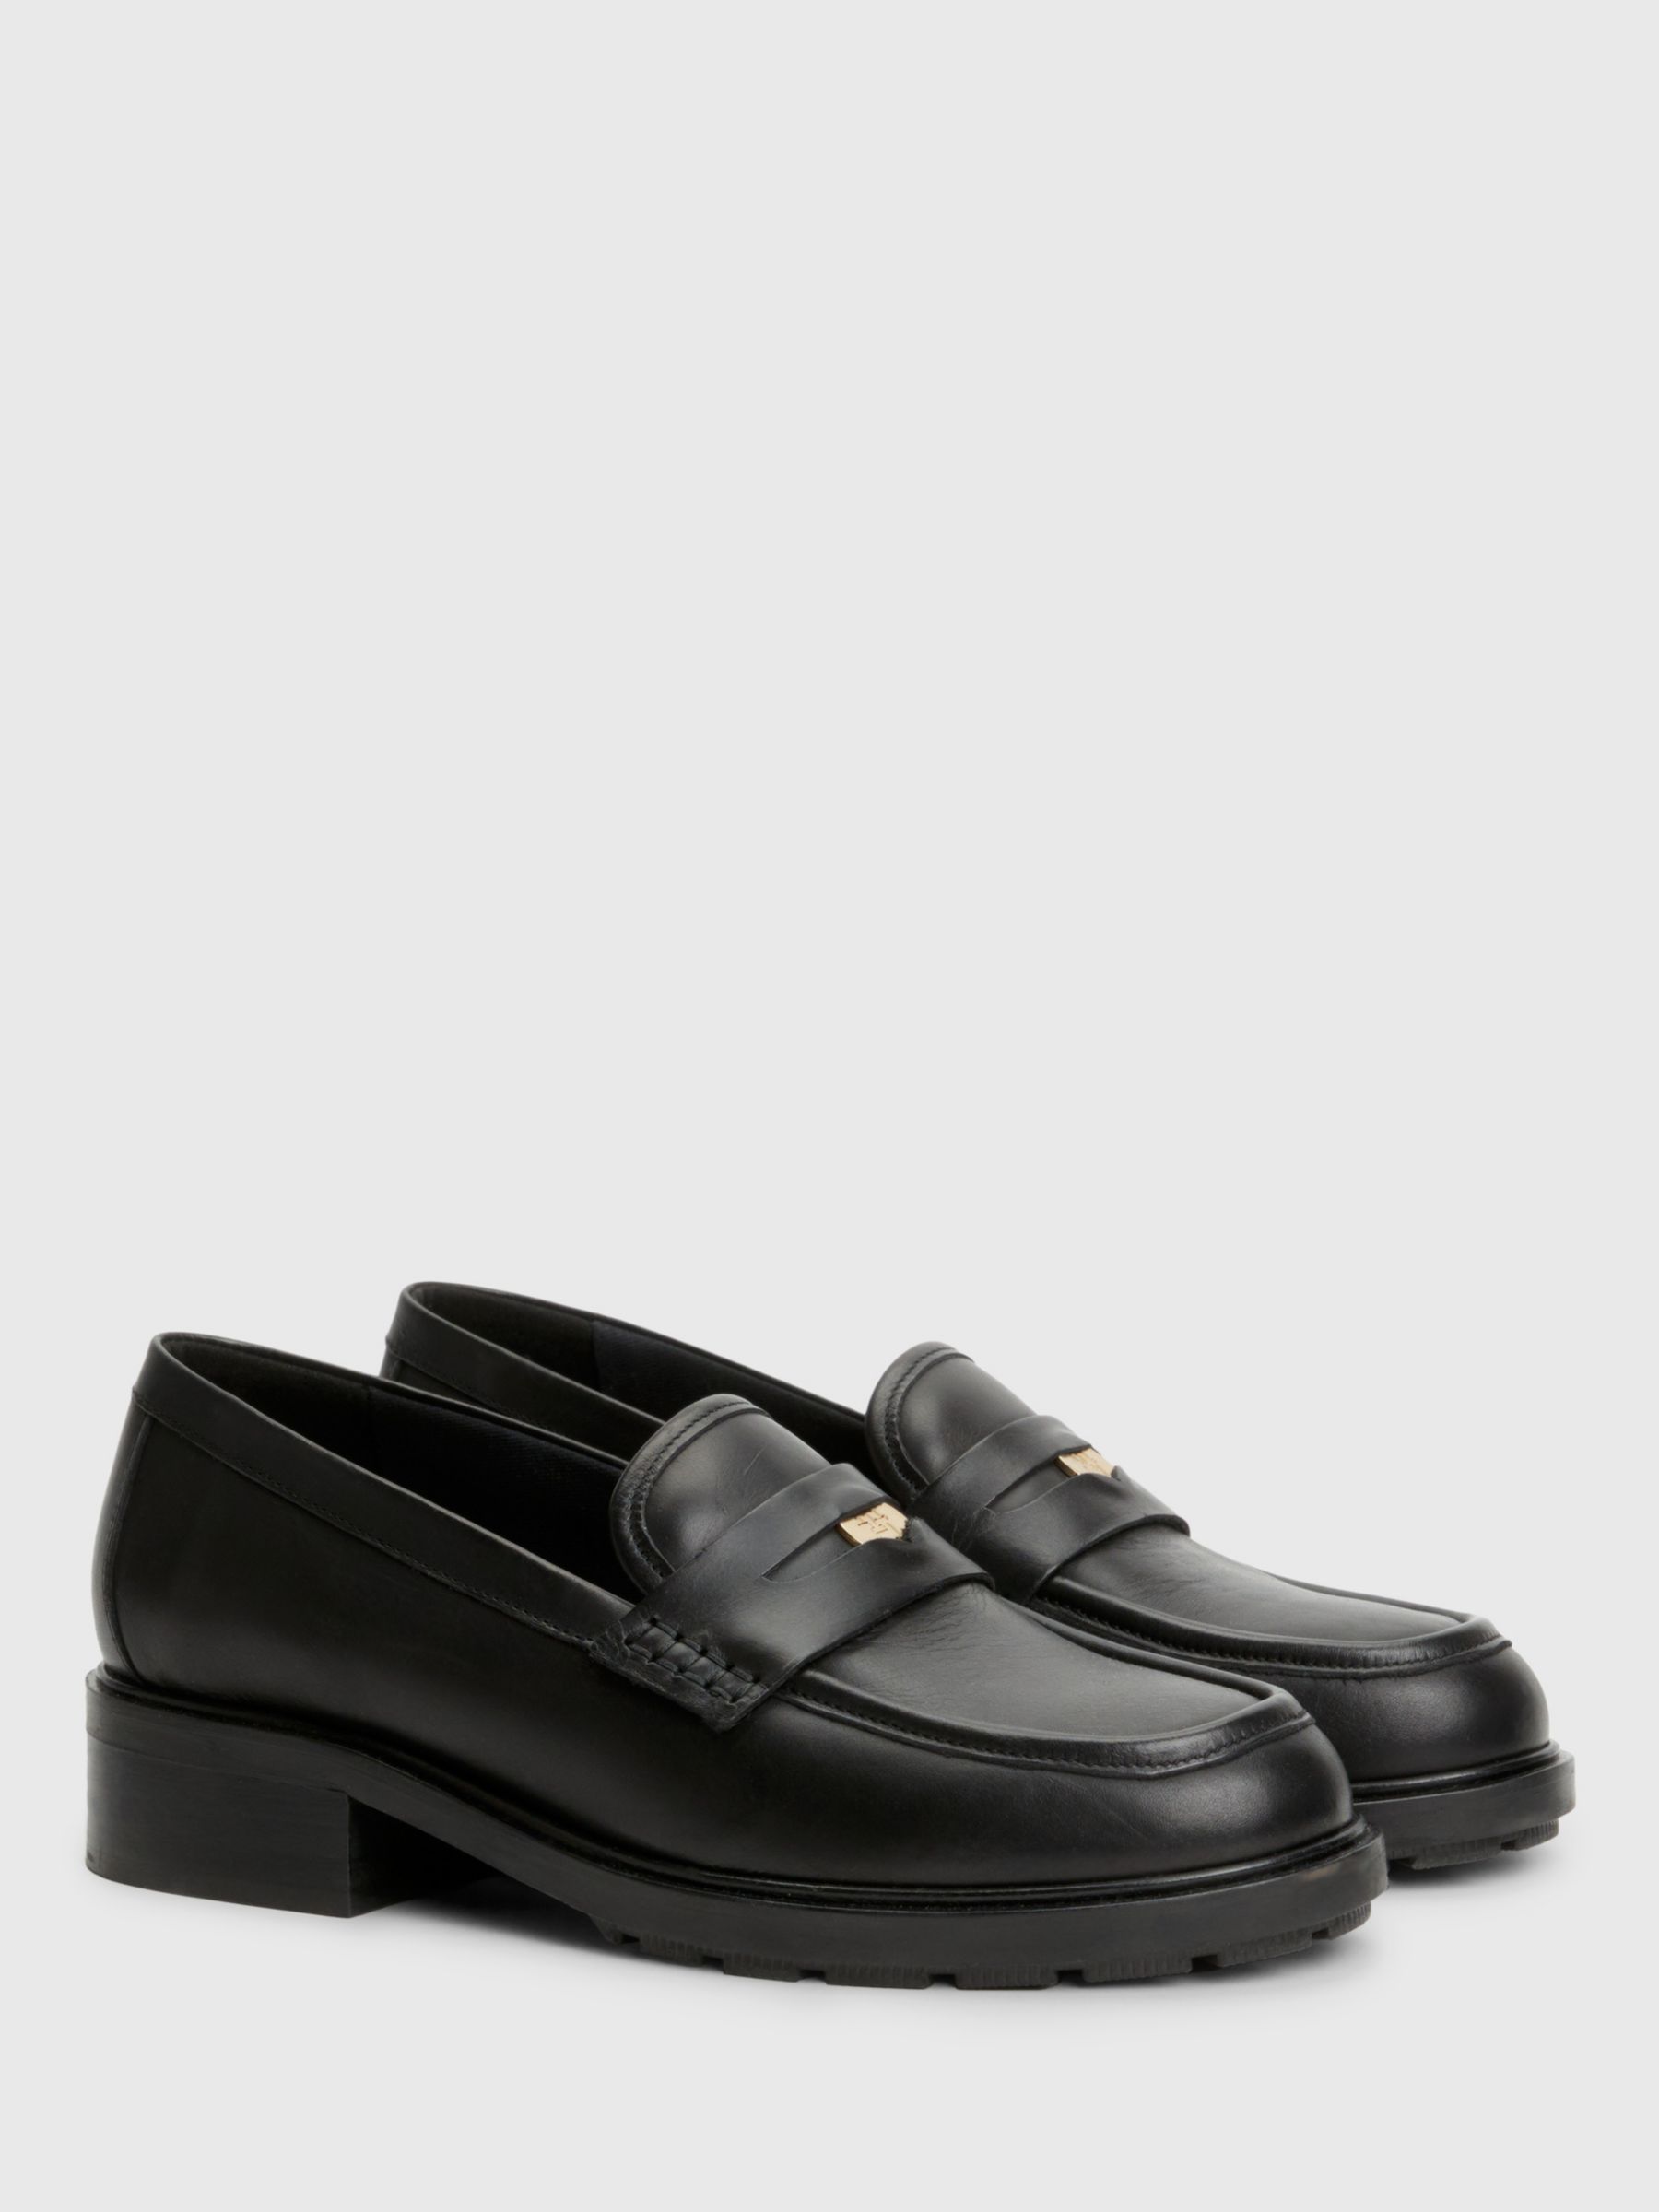 Tommy Hilfiger Iconic Leather Loafers, Black